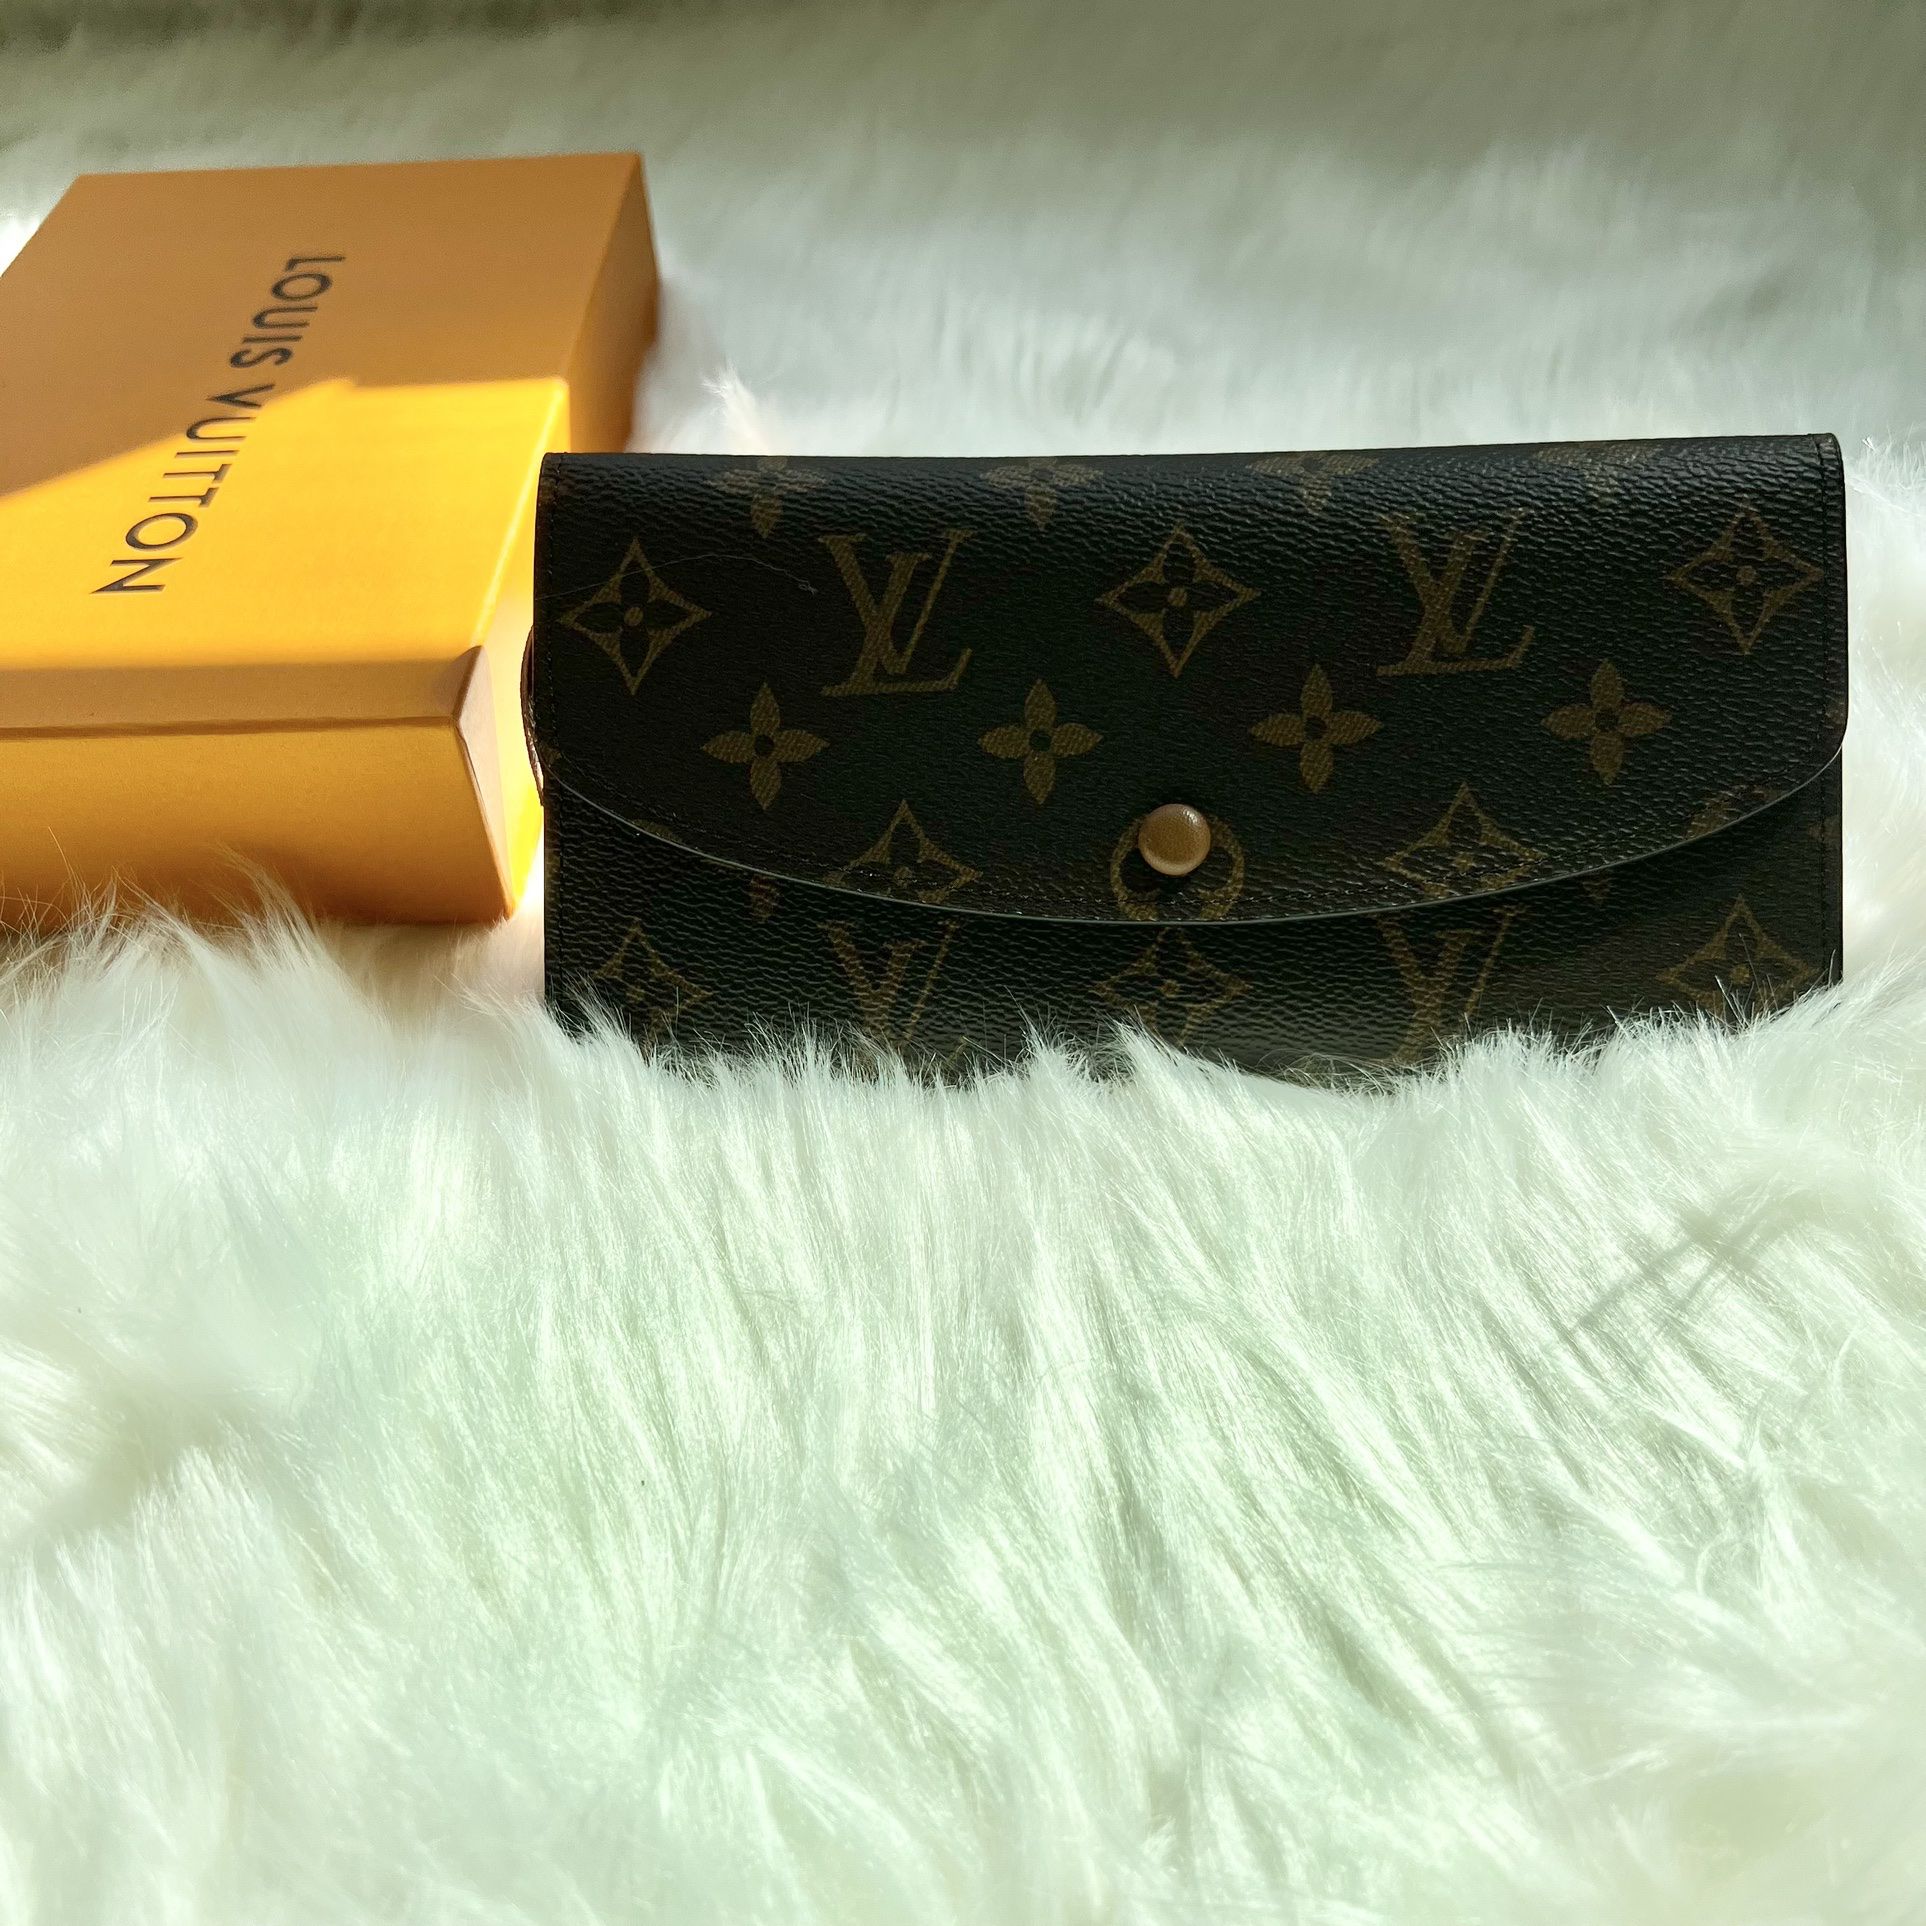 Women Used Louis Vuitton Wallet In Excellent Condition Price $150 for Sale  in Mcdonogh, MD - OfferUp